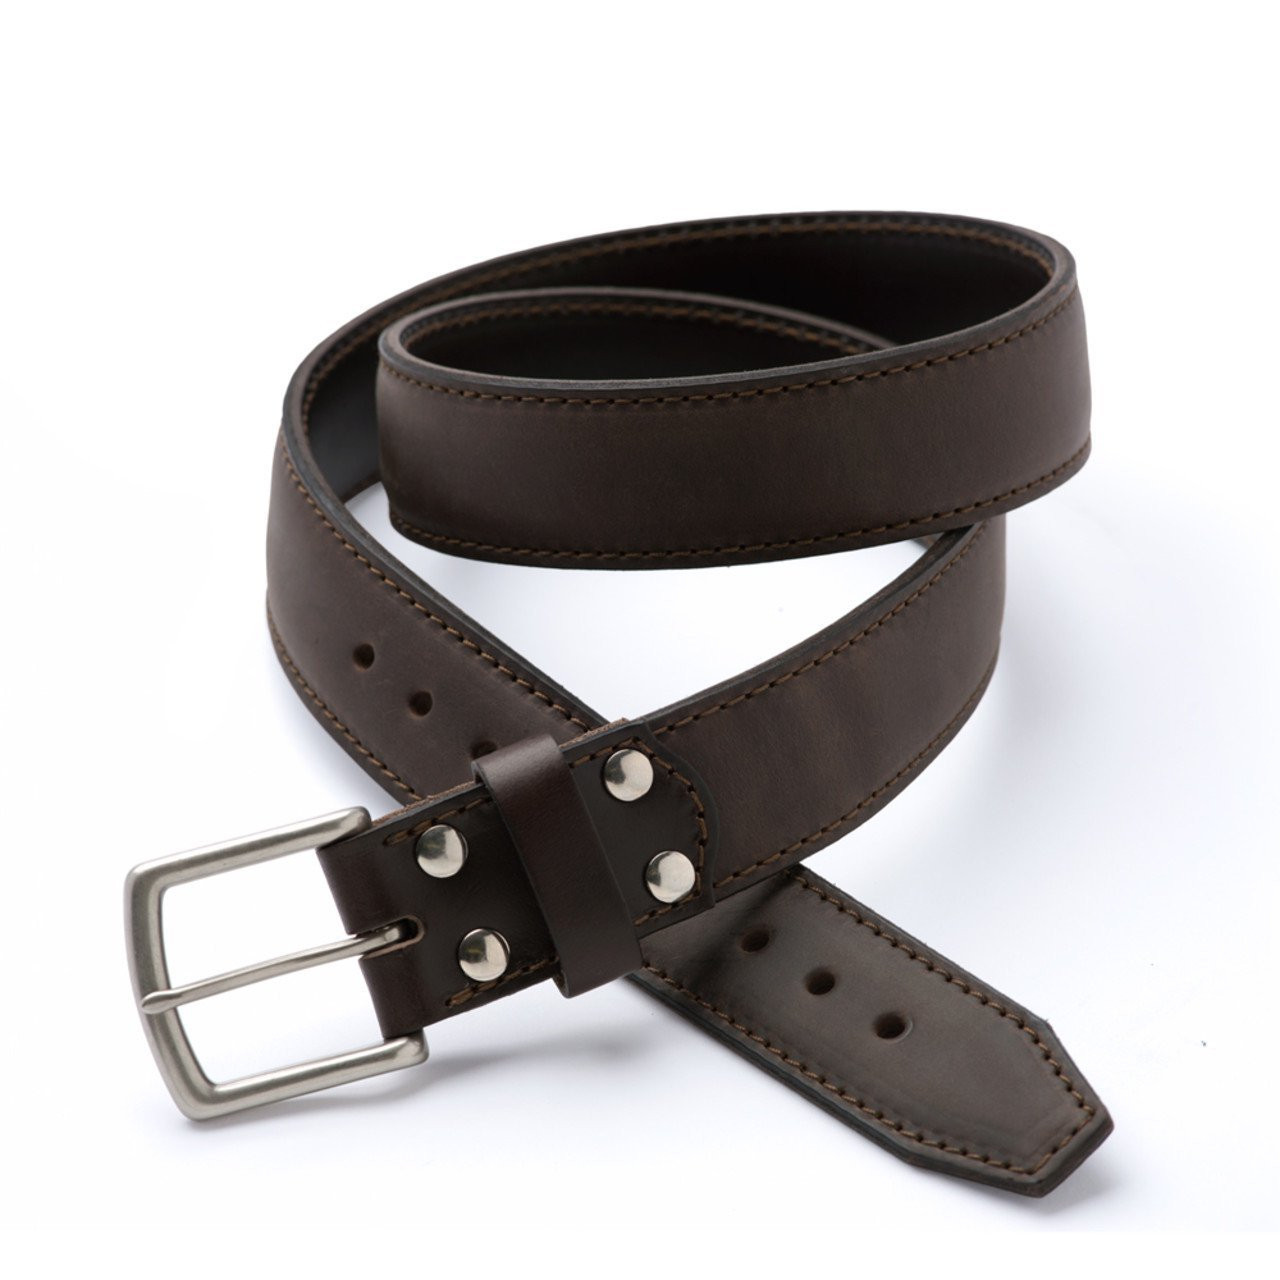 WOLFANT Full Grain Leather Belt,100% Italian Real Solid Leather